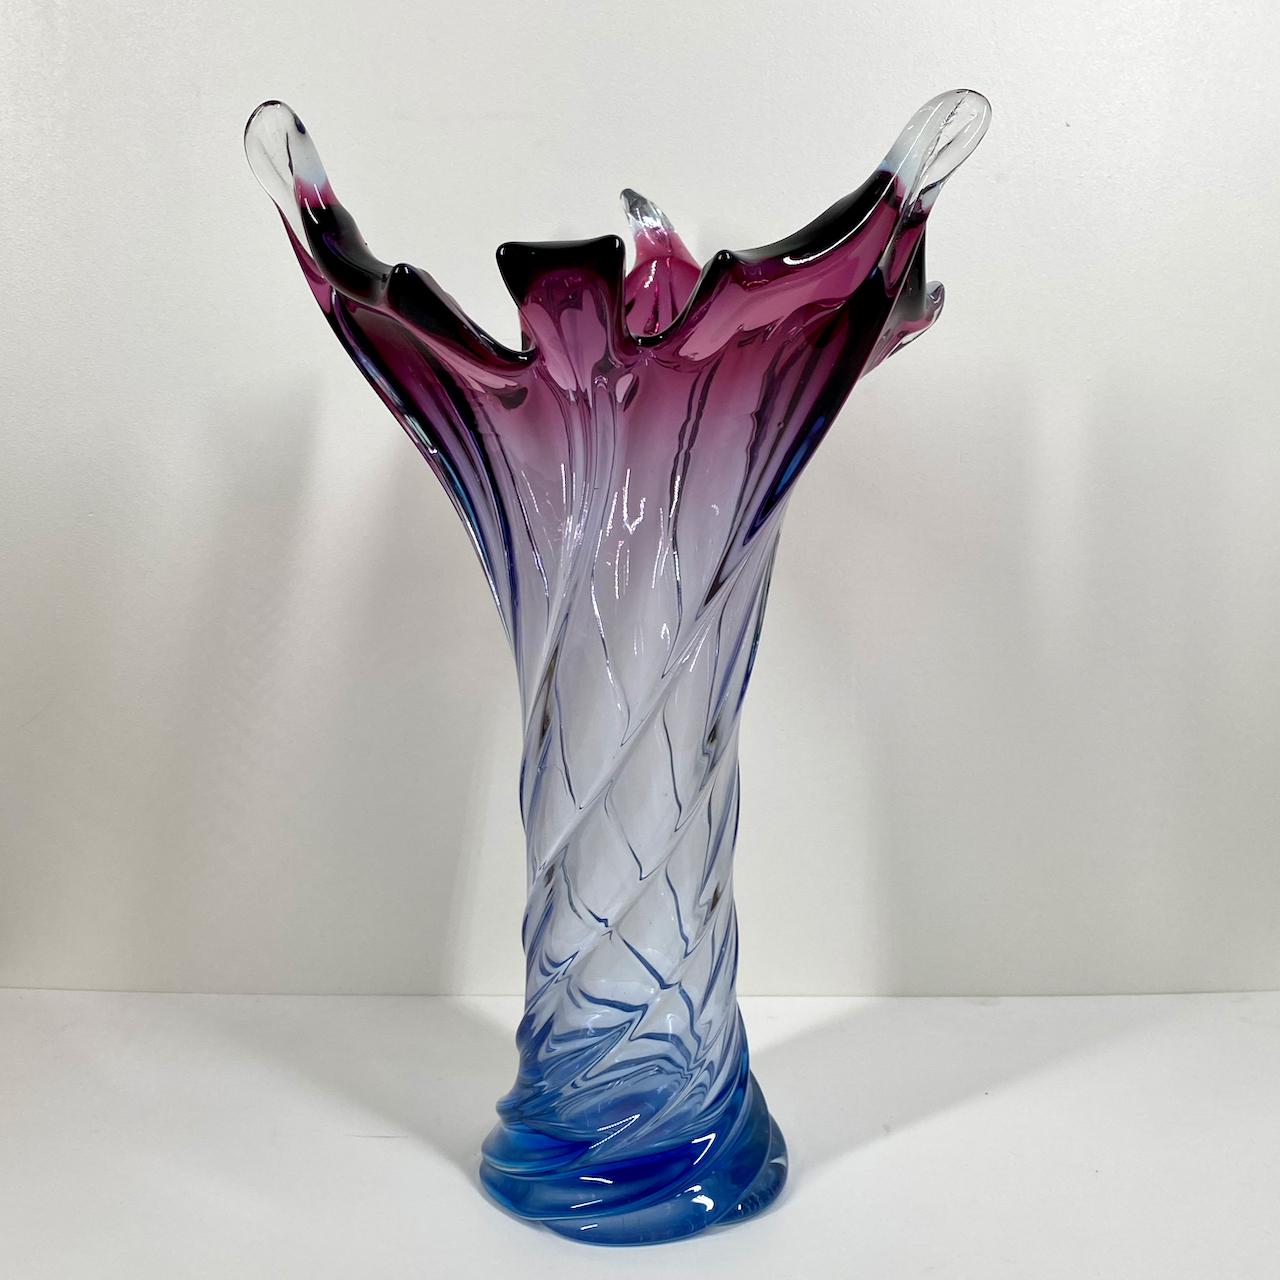 A Venetian organic glass sculpture vase, made on the island of Murano, near Venice, Italy.

Made in the sommerso technique. Common characteristics include a distinctive star shaped base, hot worked curled and cut out 